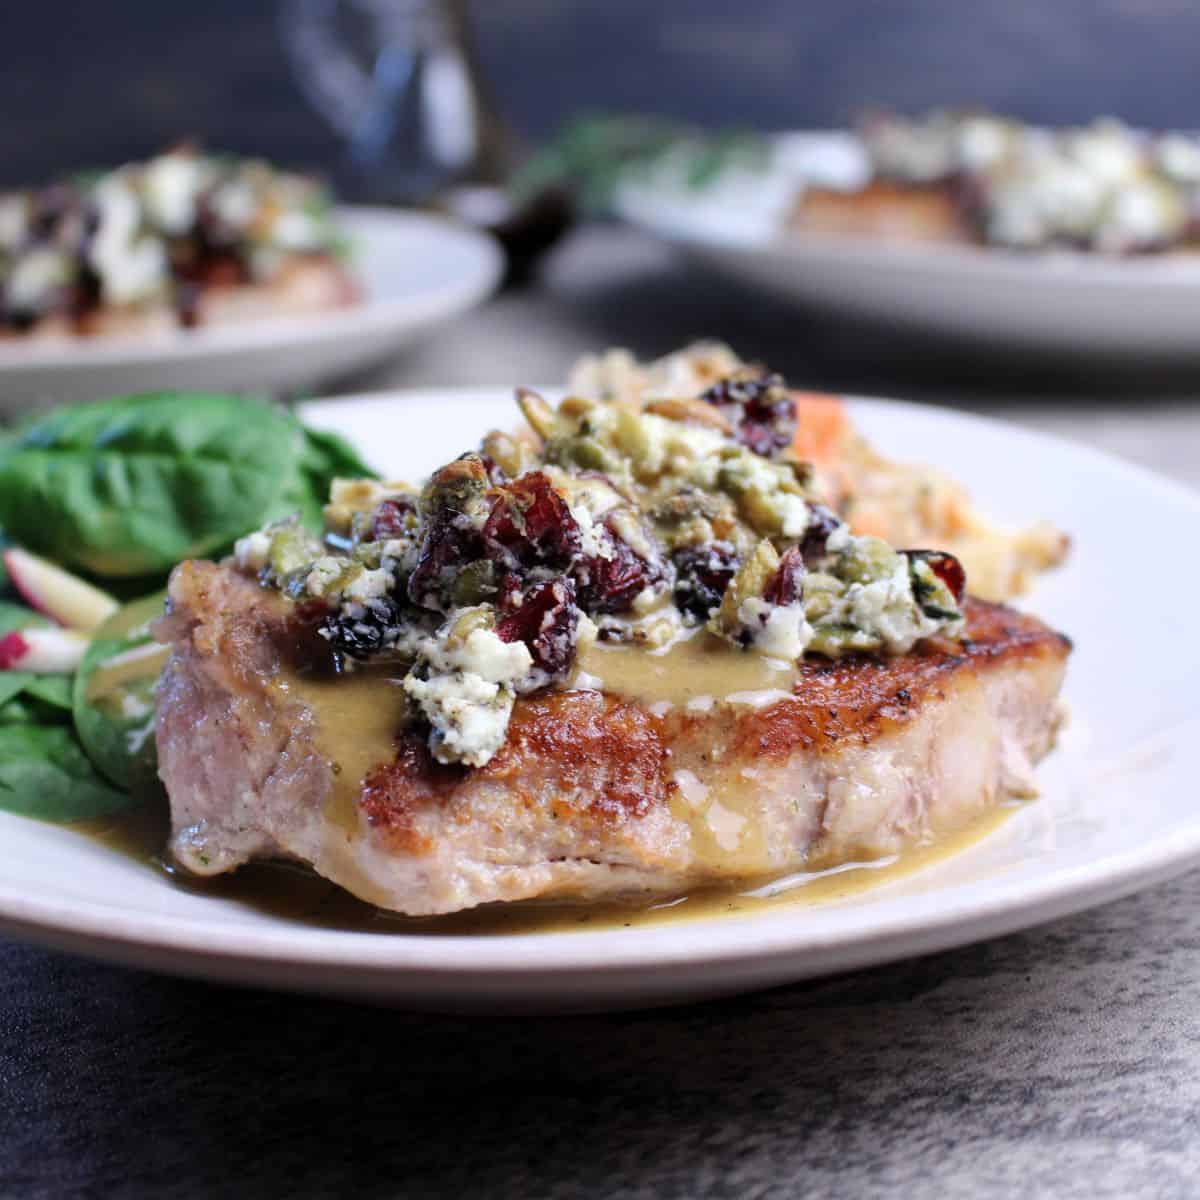 Featured image for “Pork Loin Chops with Goat Cheese Cranberry Crumble”